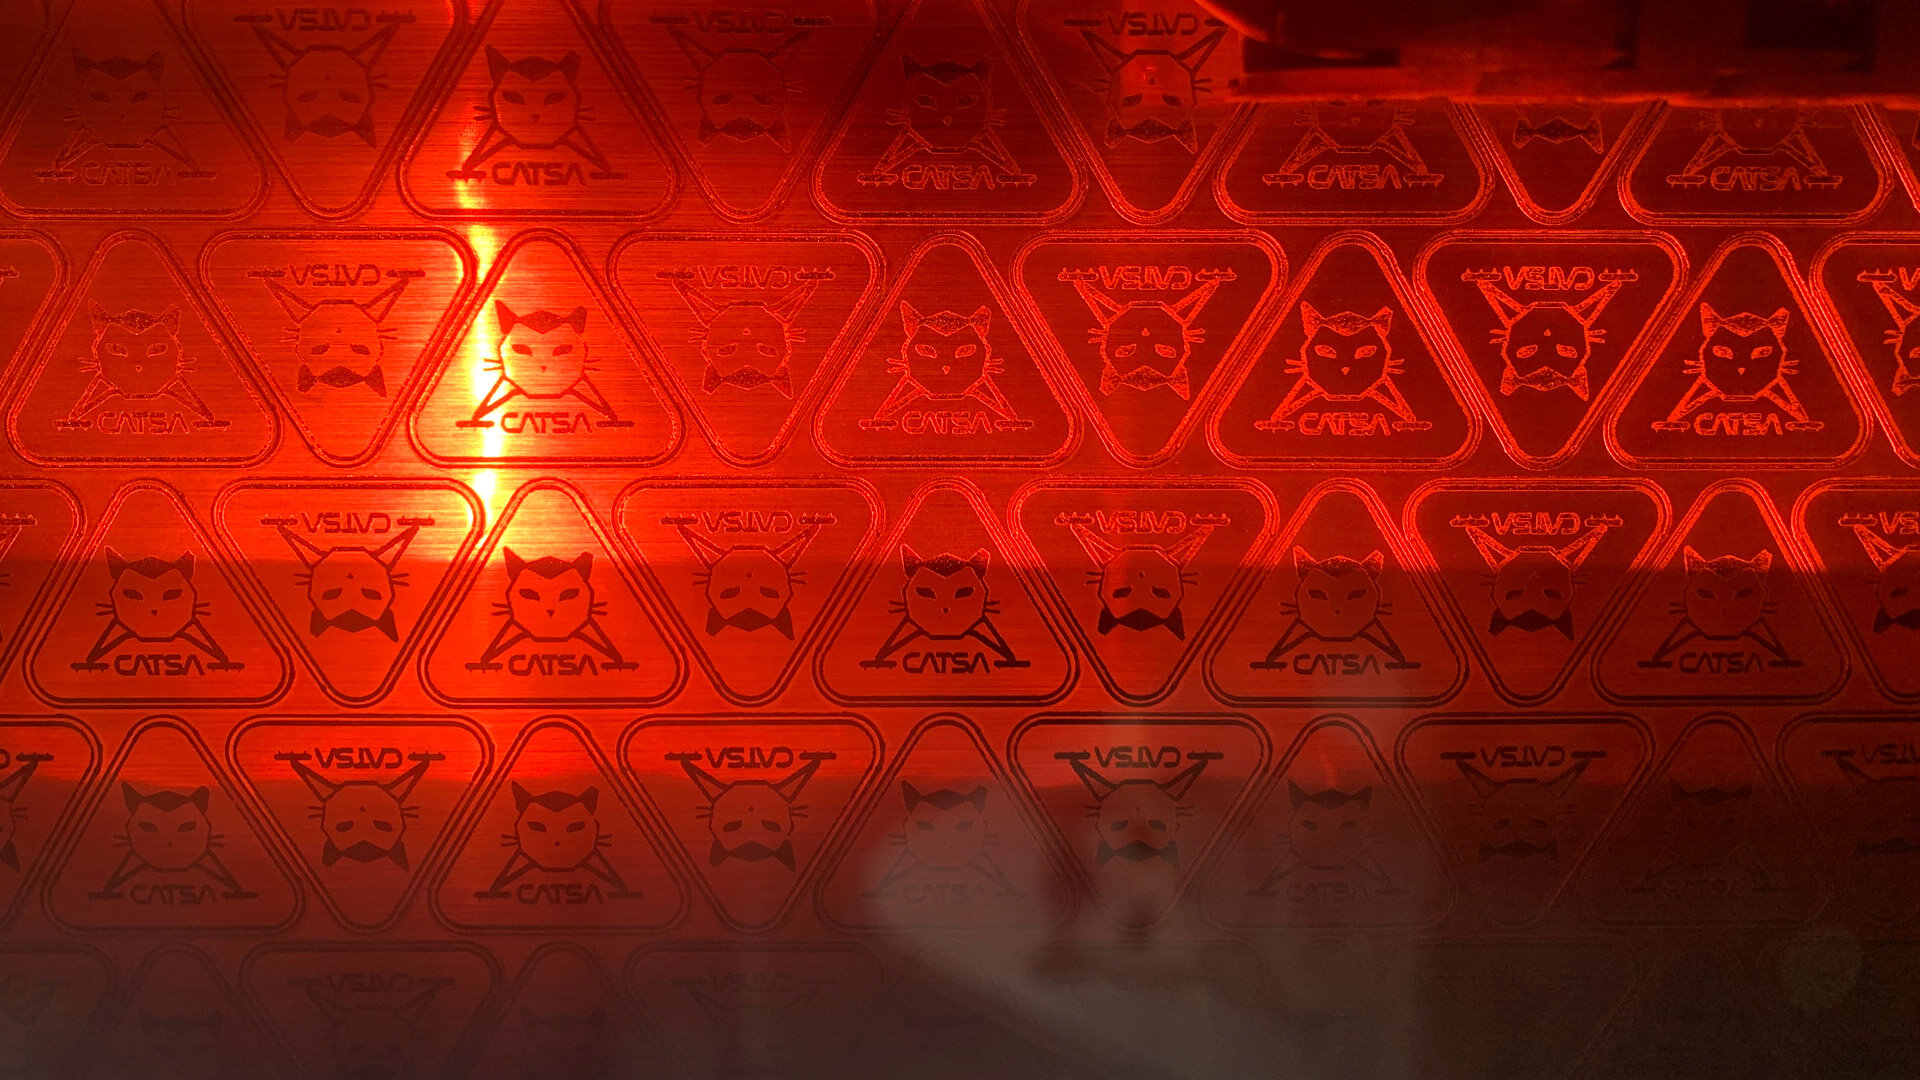  Industrial lasers are amazing tools when they cooperate and we certainly love putting them to the test. Here we are etching some samples of the Mission Logo badges that will adorn the front of each Mark1. 